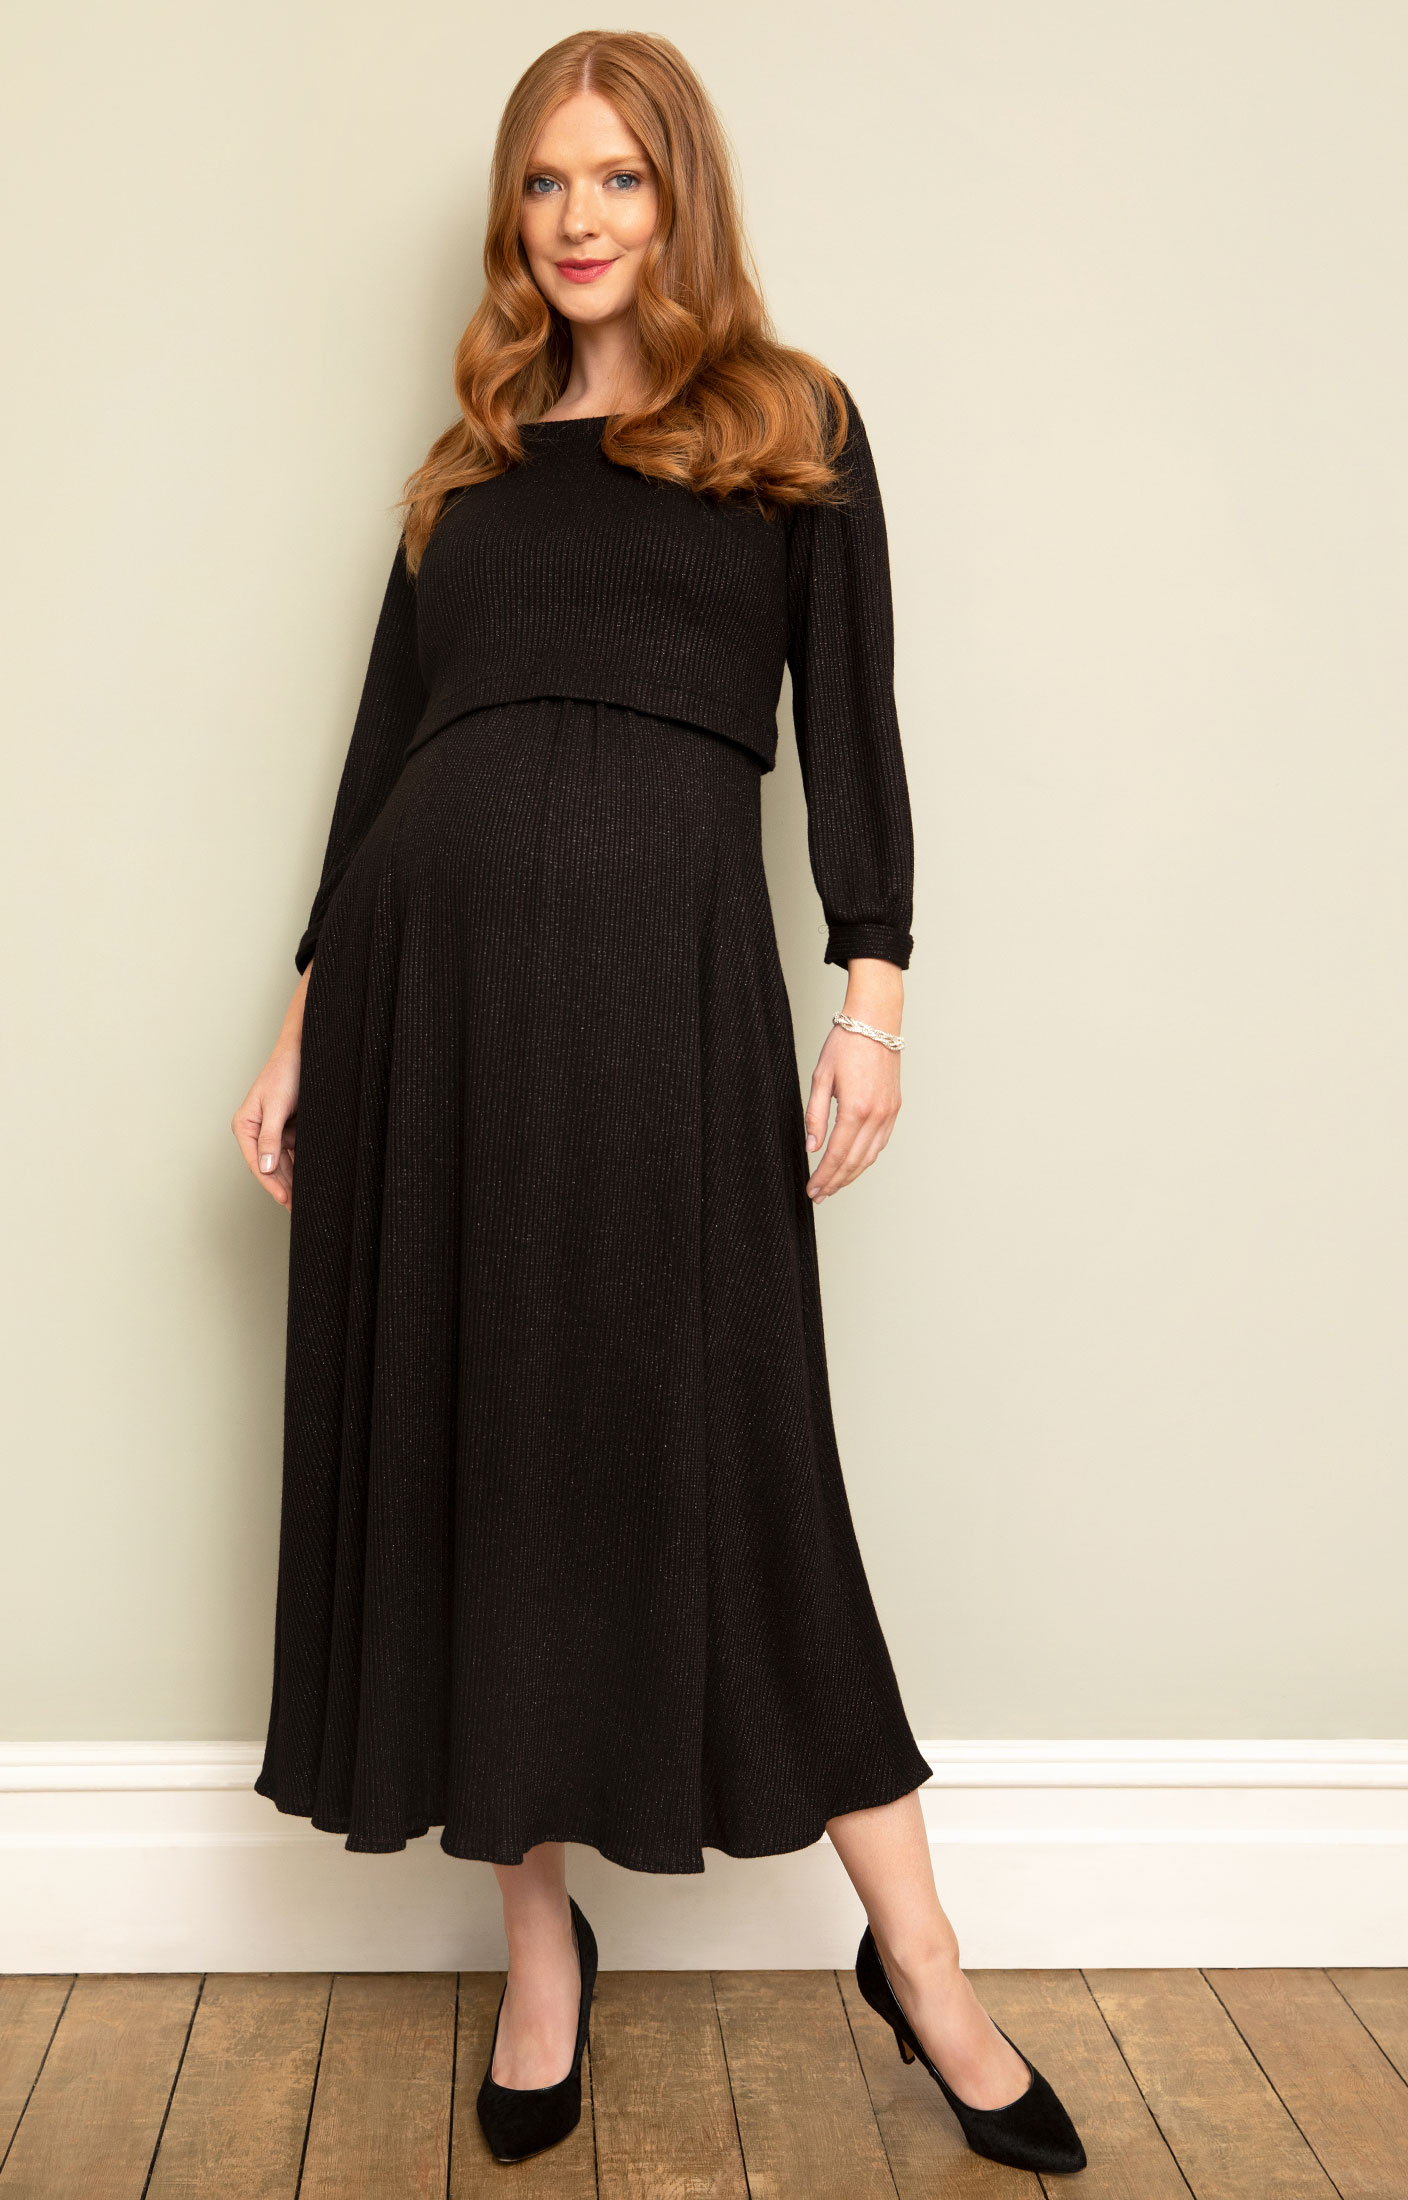 Black Lace Maternity Turtleneck Maxi Maternity Gown For Pregnancy  Photography Long Sleeve, Pregnant Women Y0924 From Nickyoung06, $23.82 |  DHgate.Com